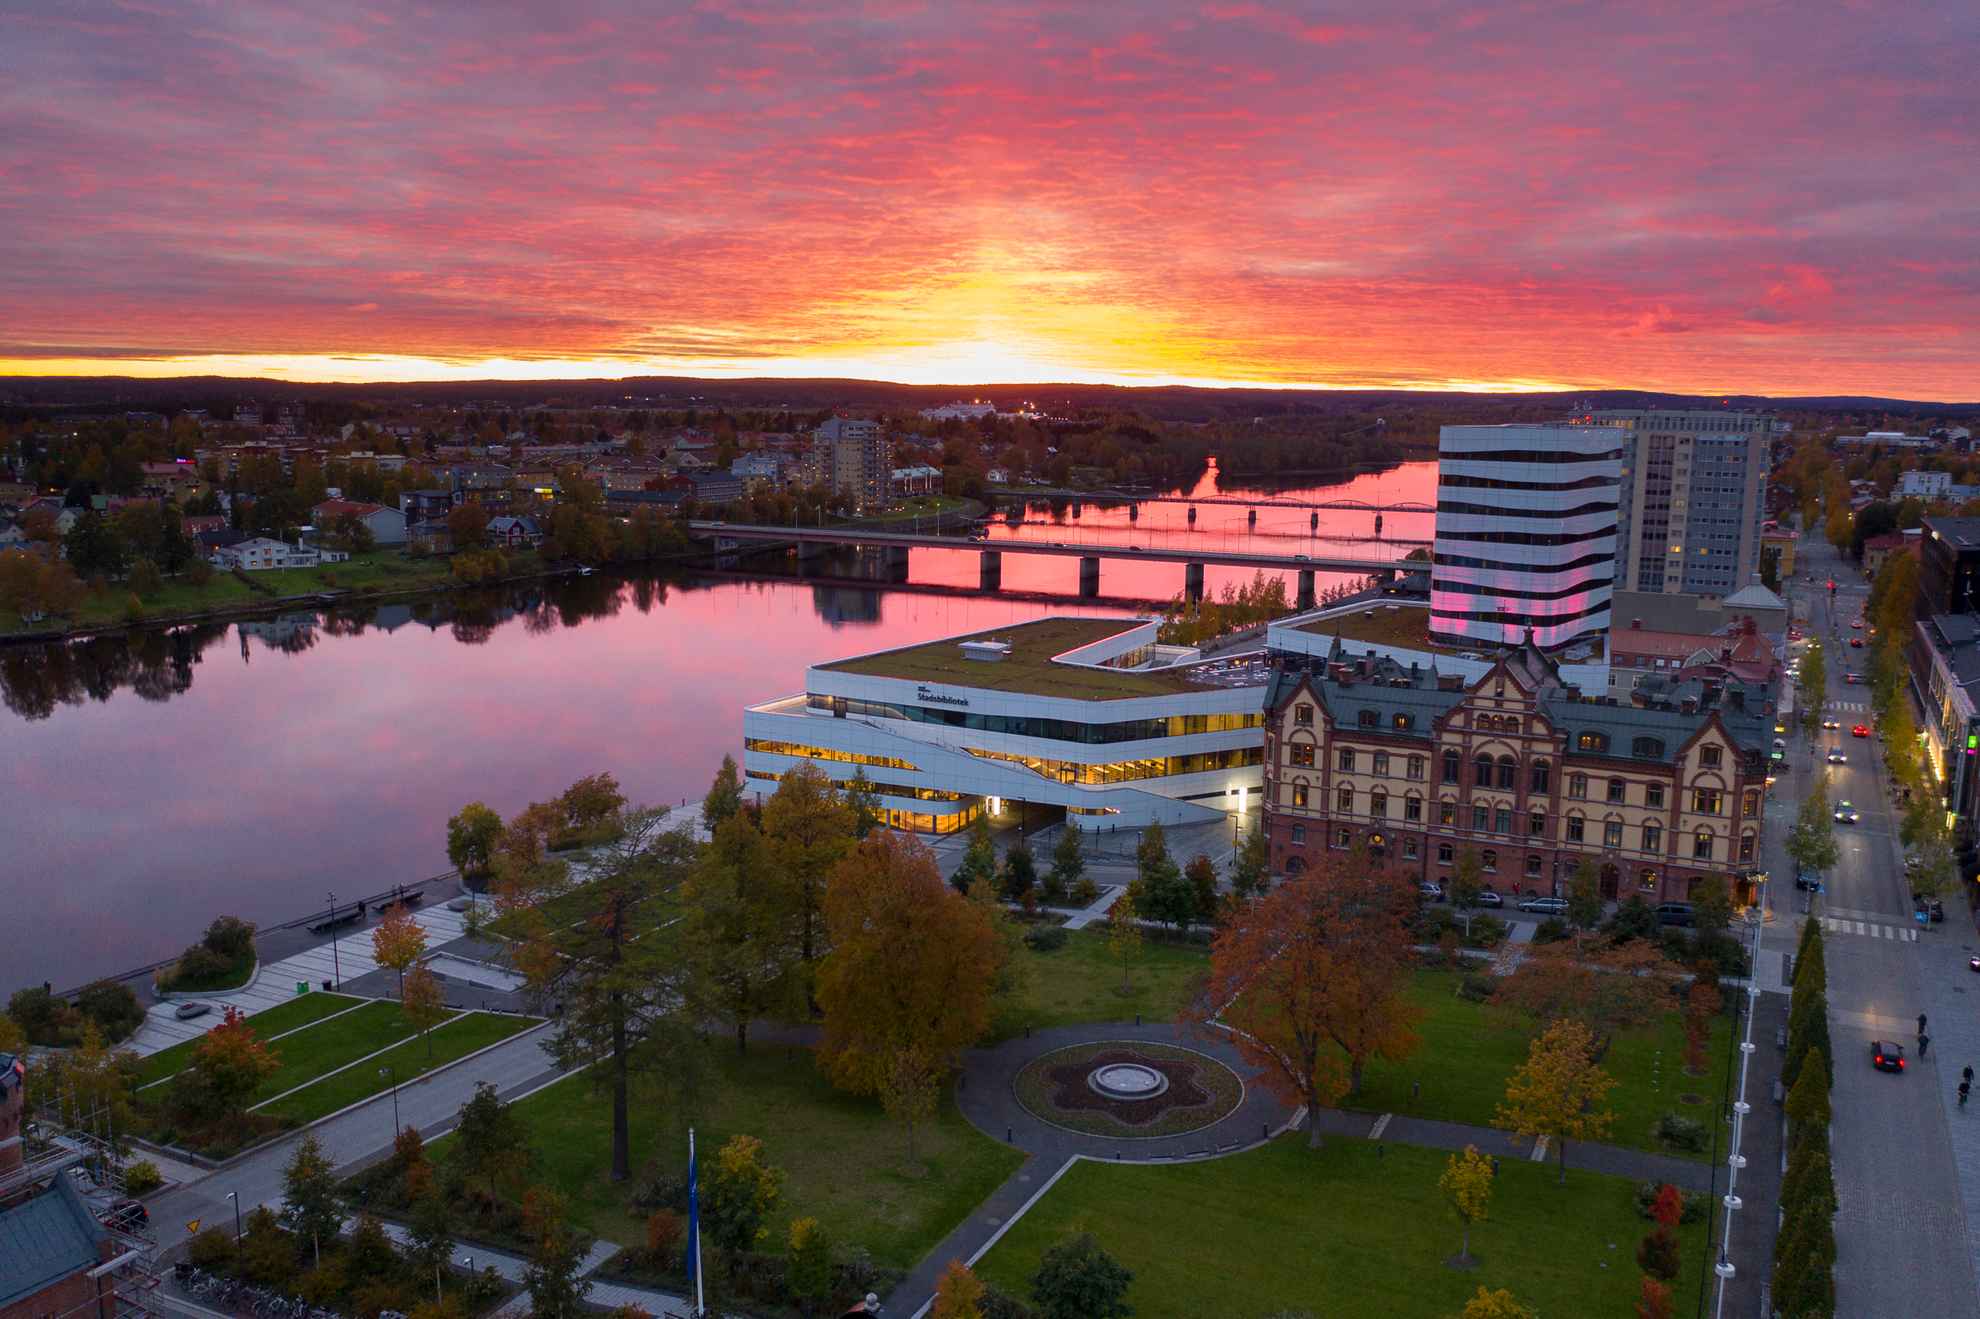 Sunset over the river and the city in Umeå.